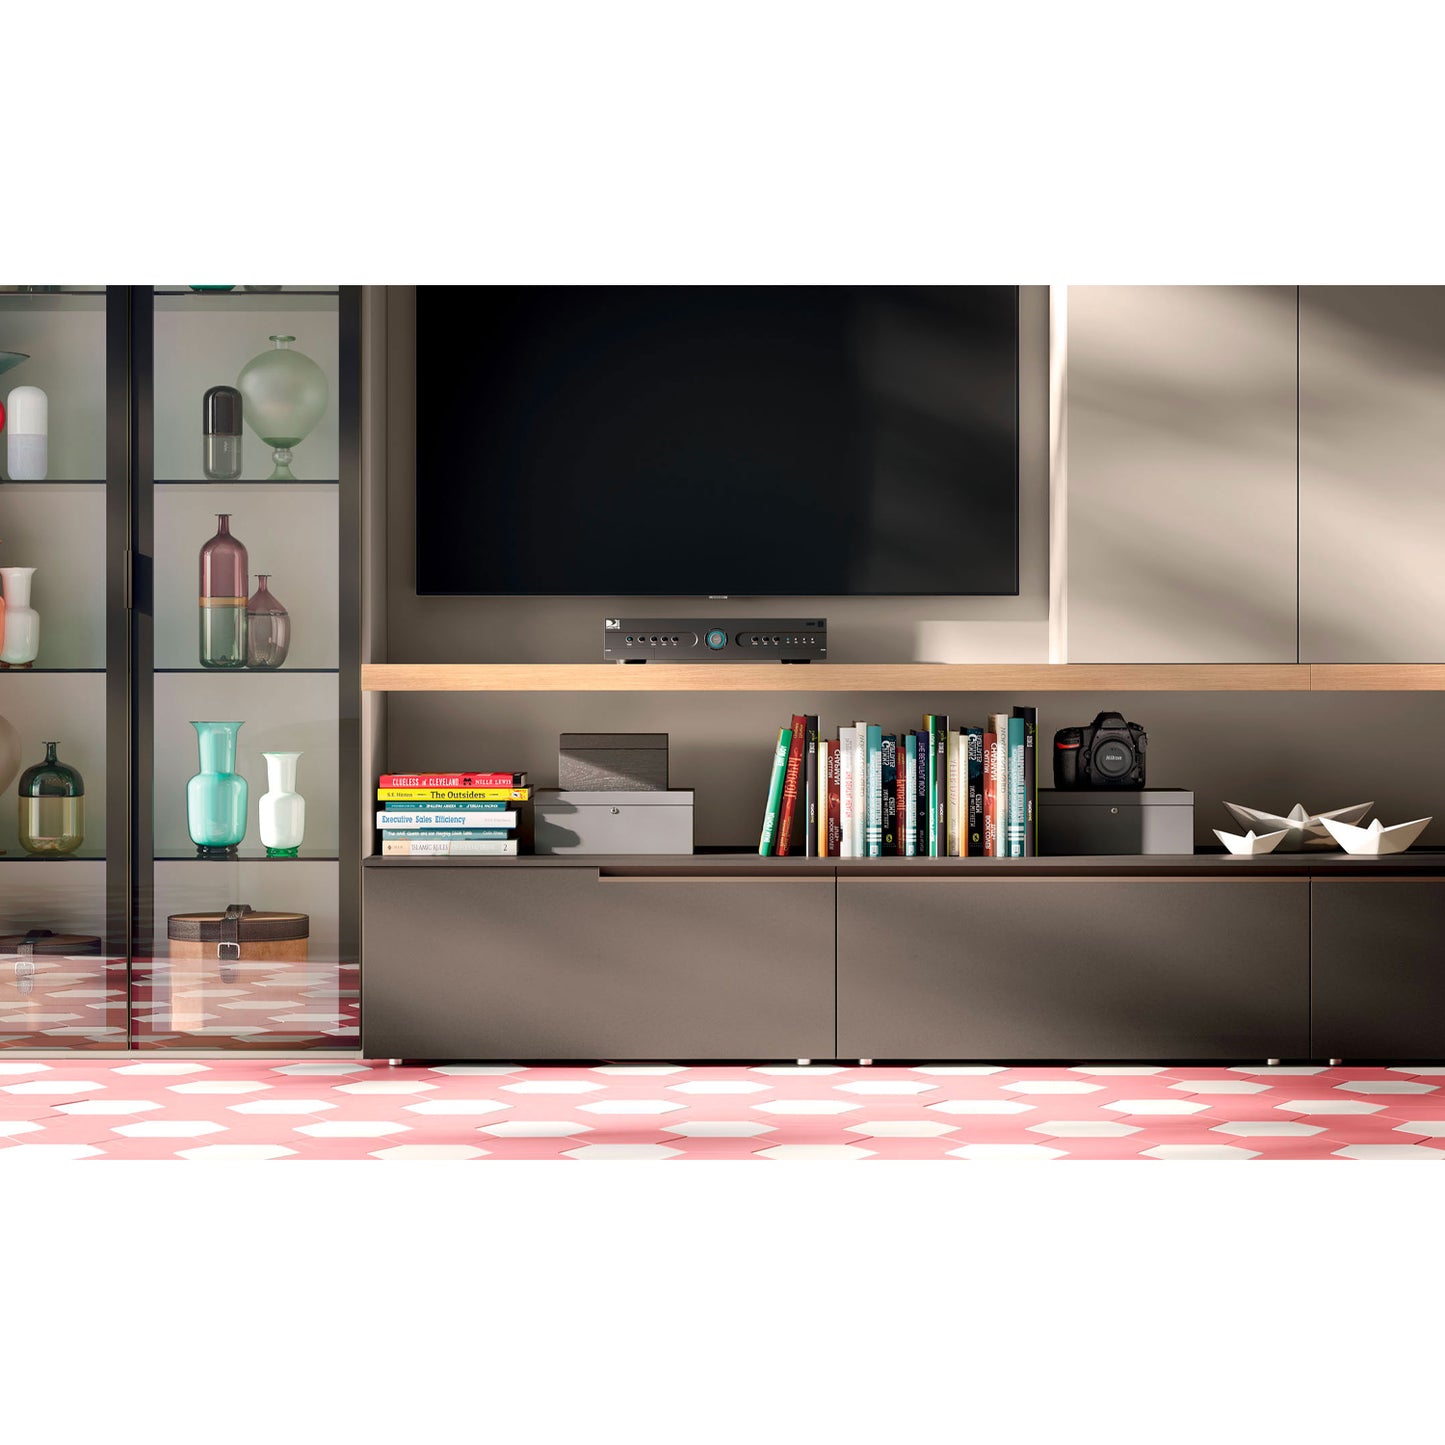 Light Day 22 TV Media with storage and glass doors by Orme Design